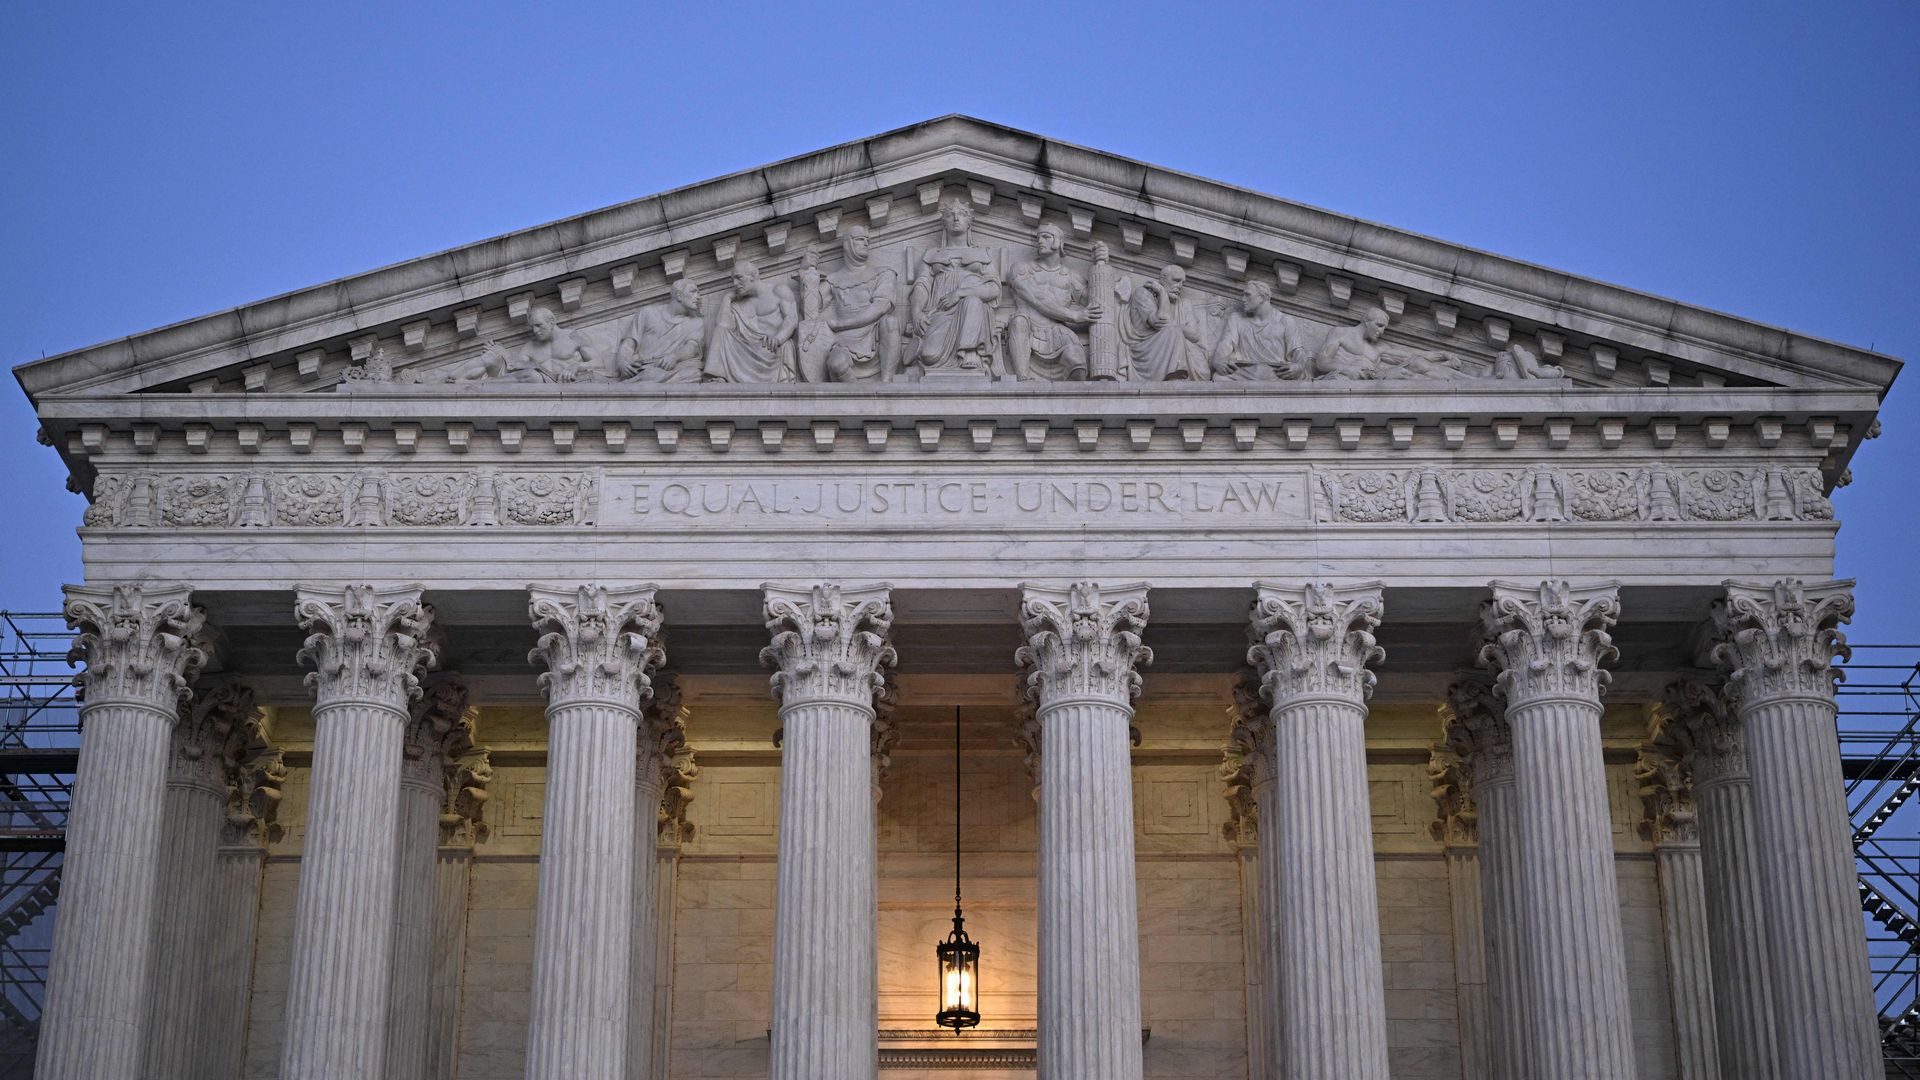 Exterior photo of the front of the Supreme Court building.